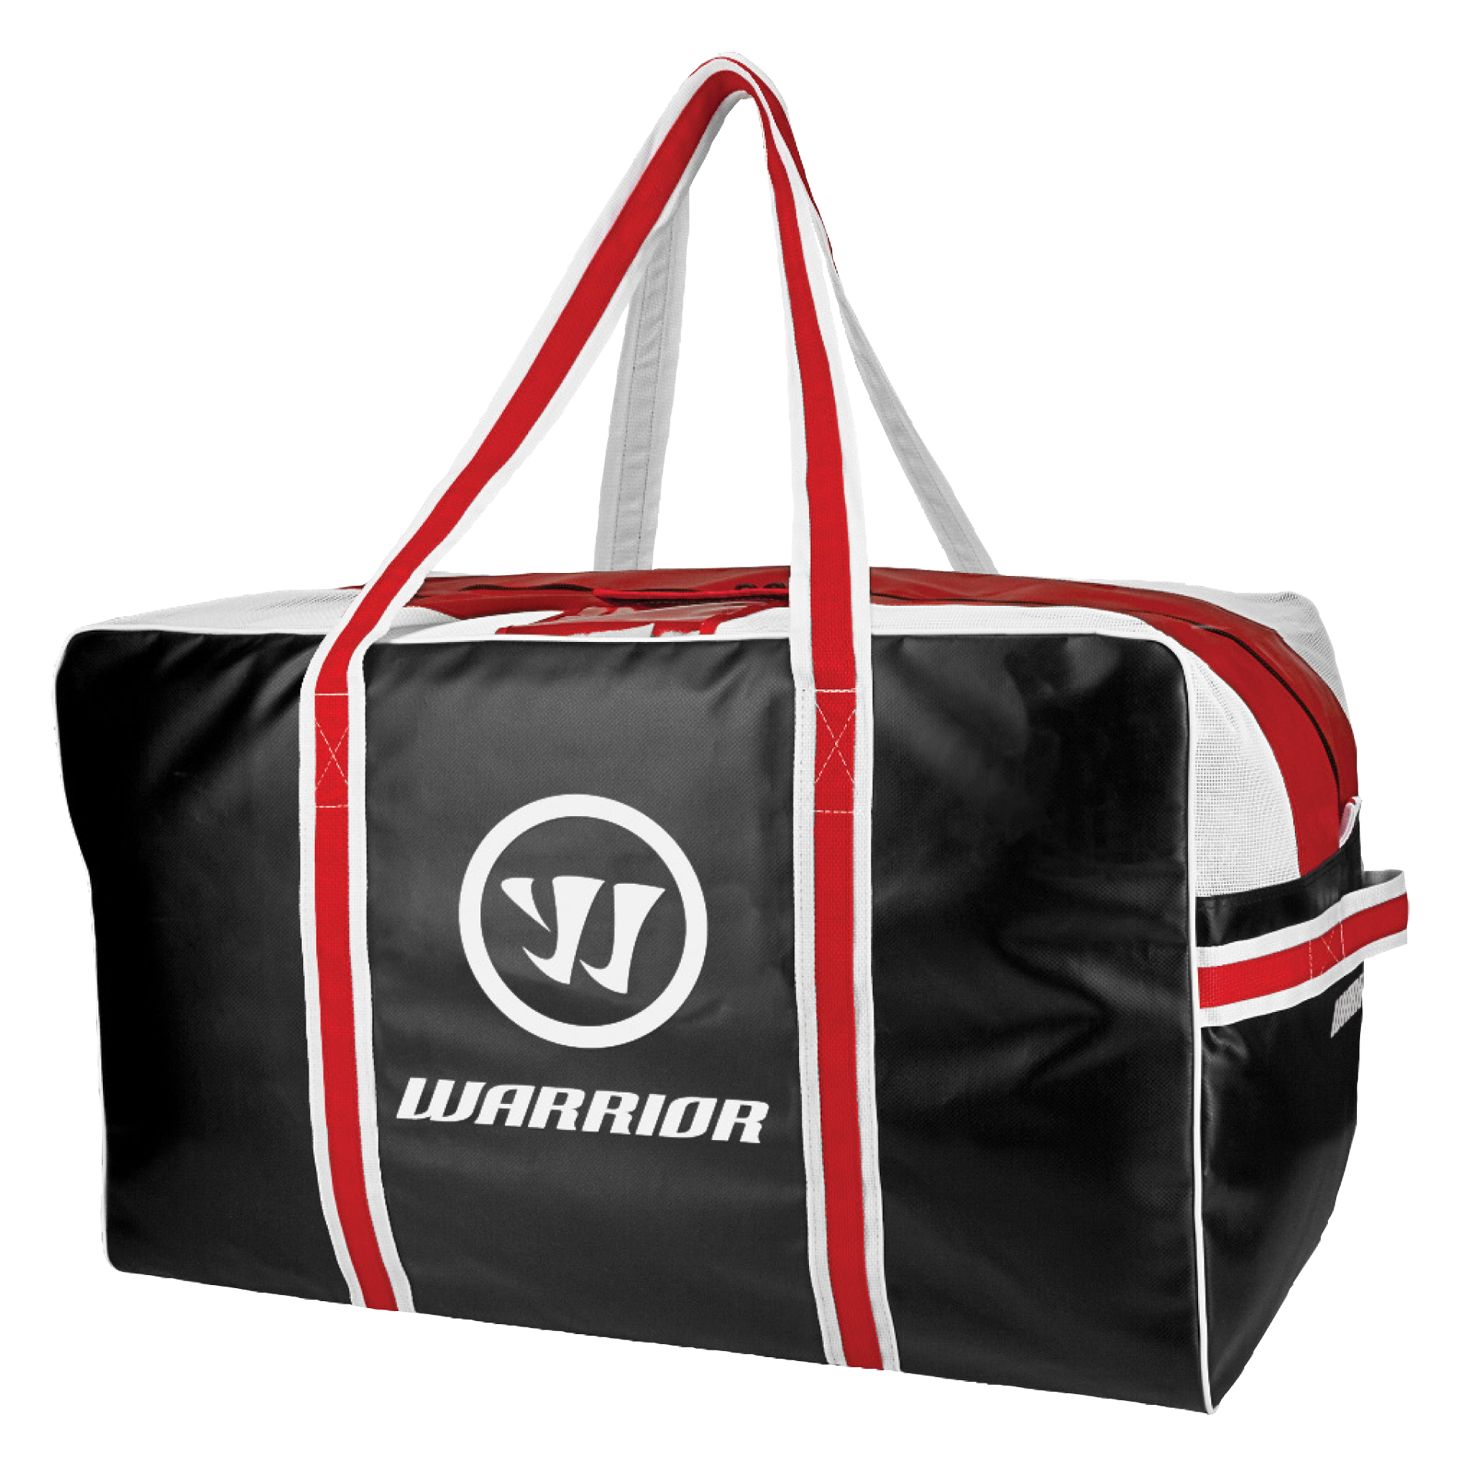 Warrior Pro Bag, Black with Red & White image number 2